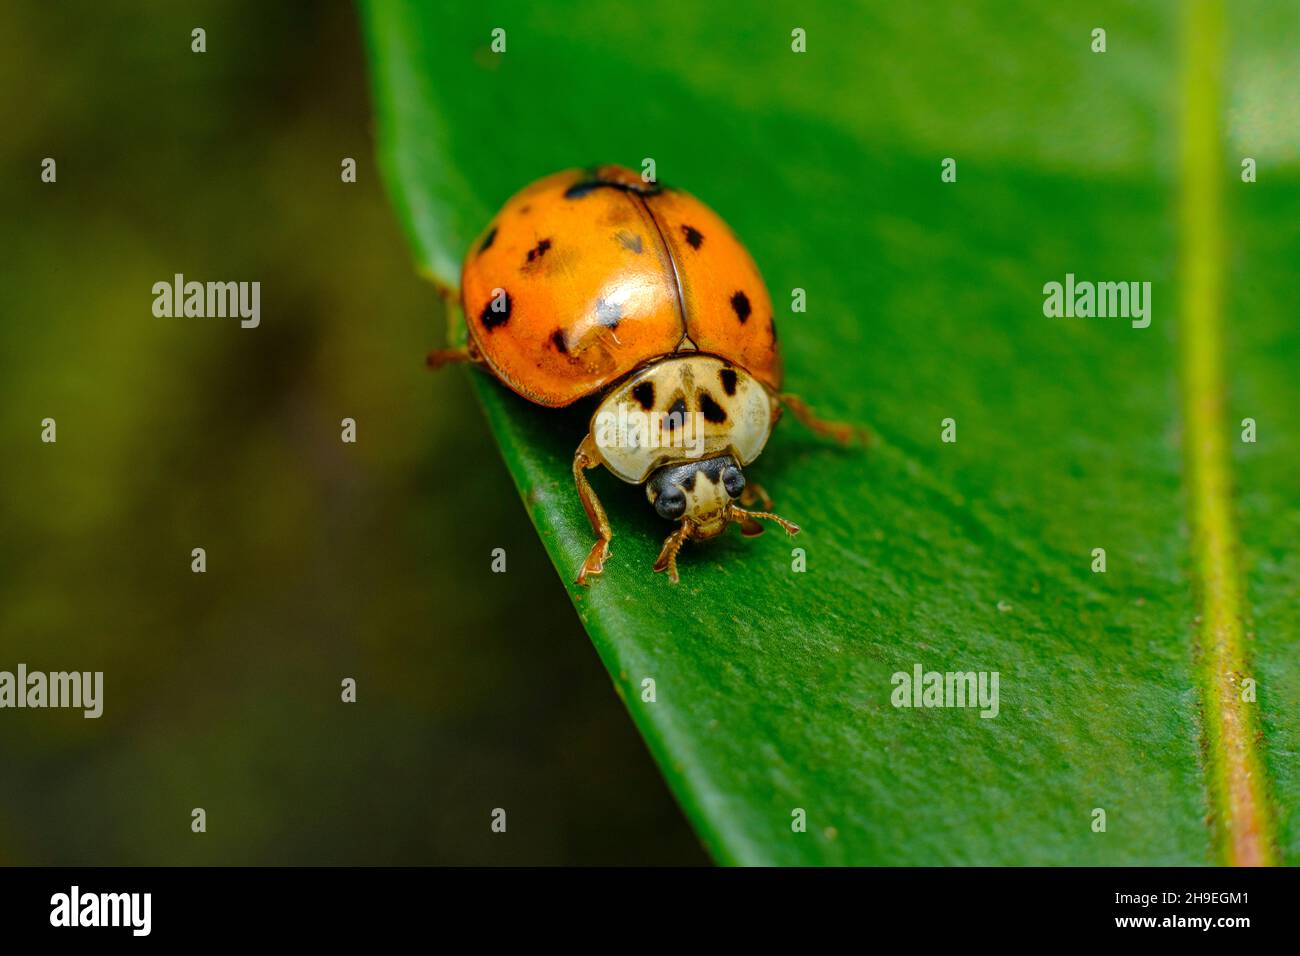 Invasive species Asian ladybeetle crawling on forest floor Stock Photo